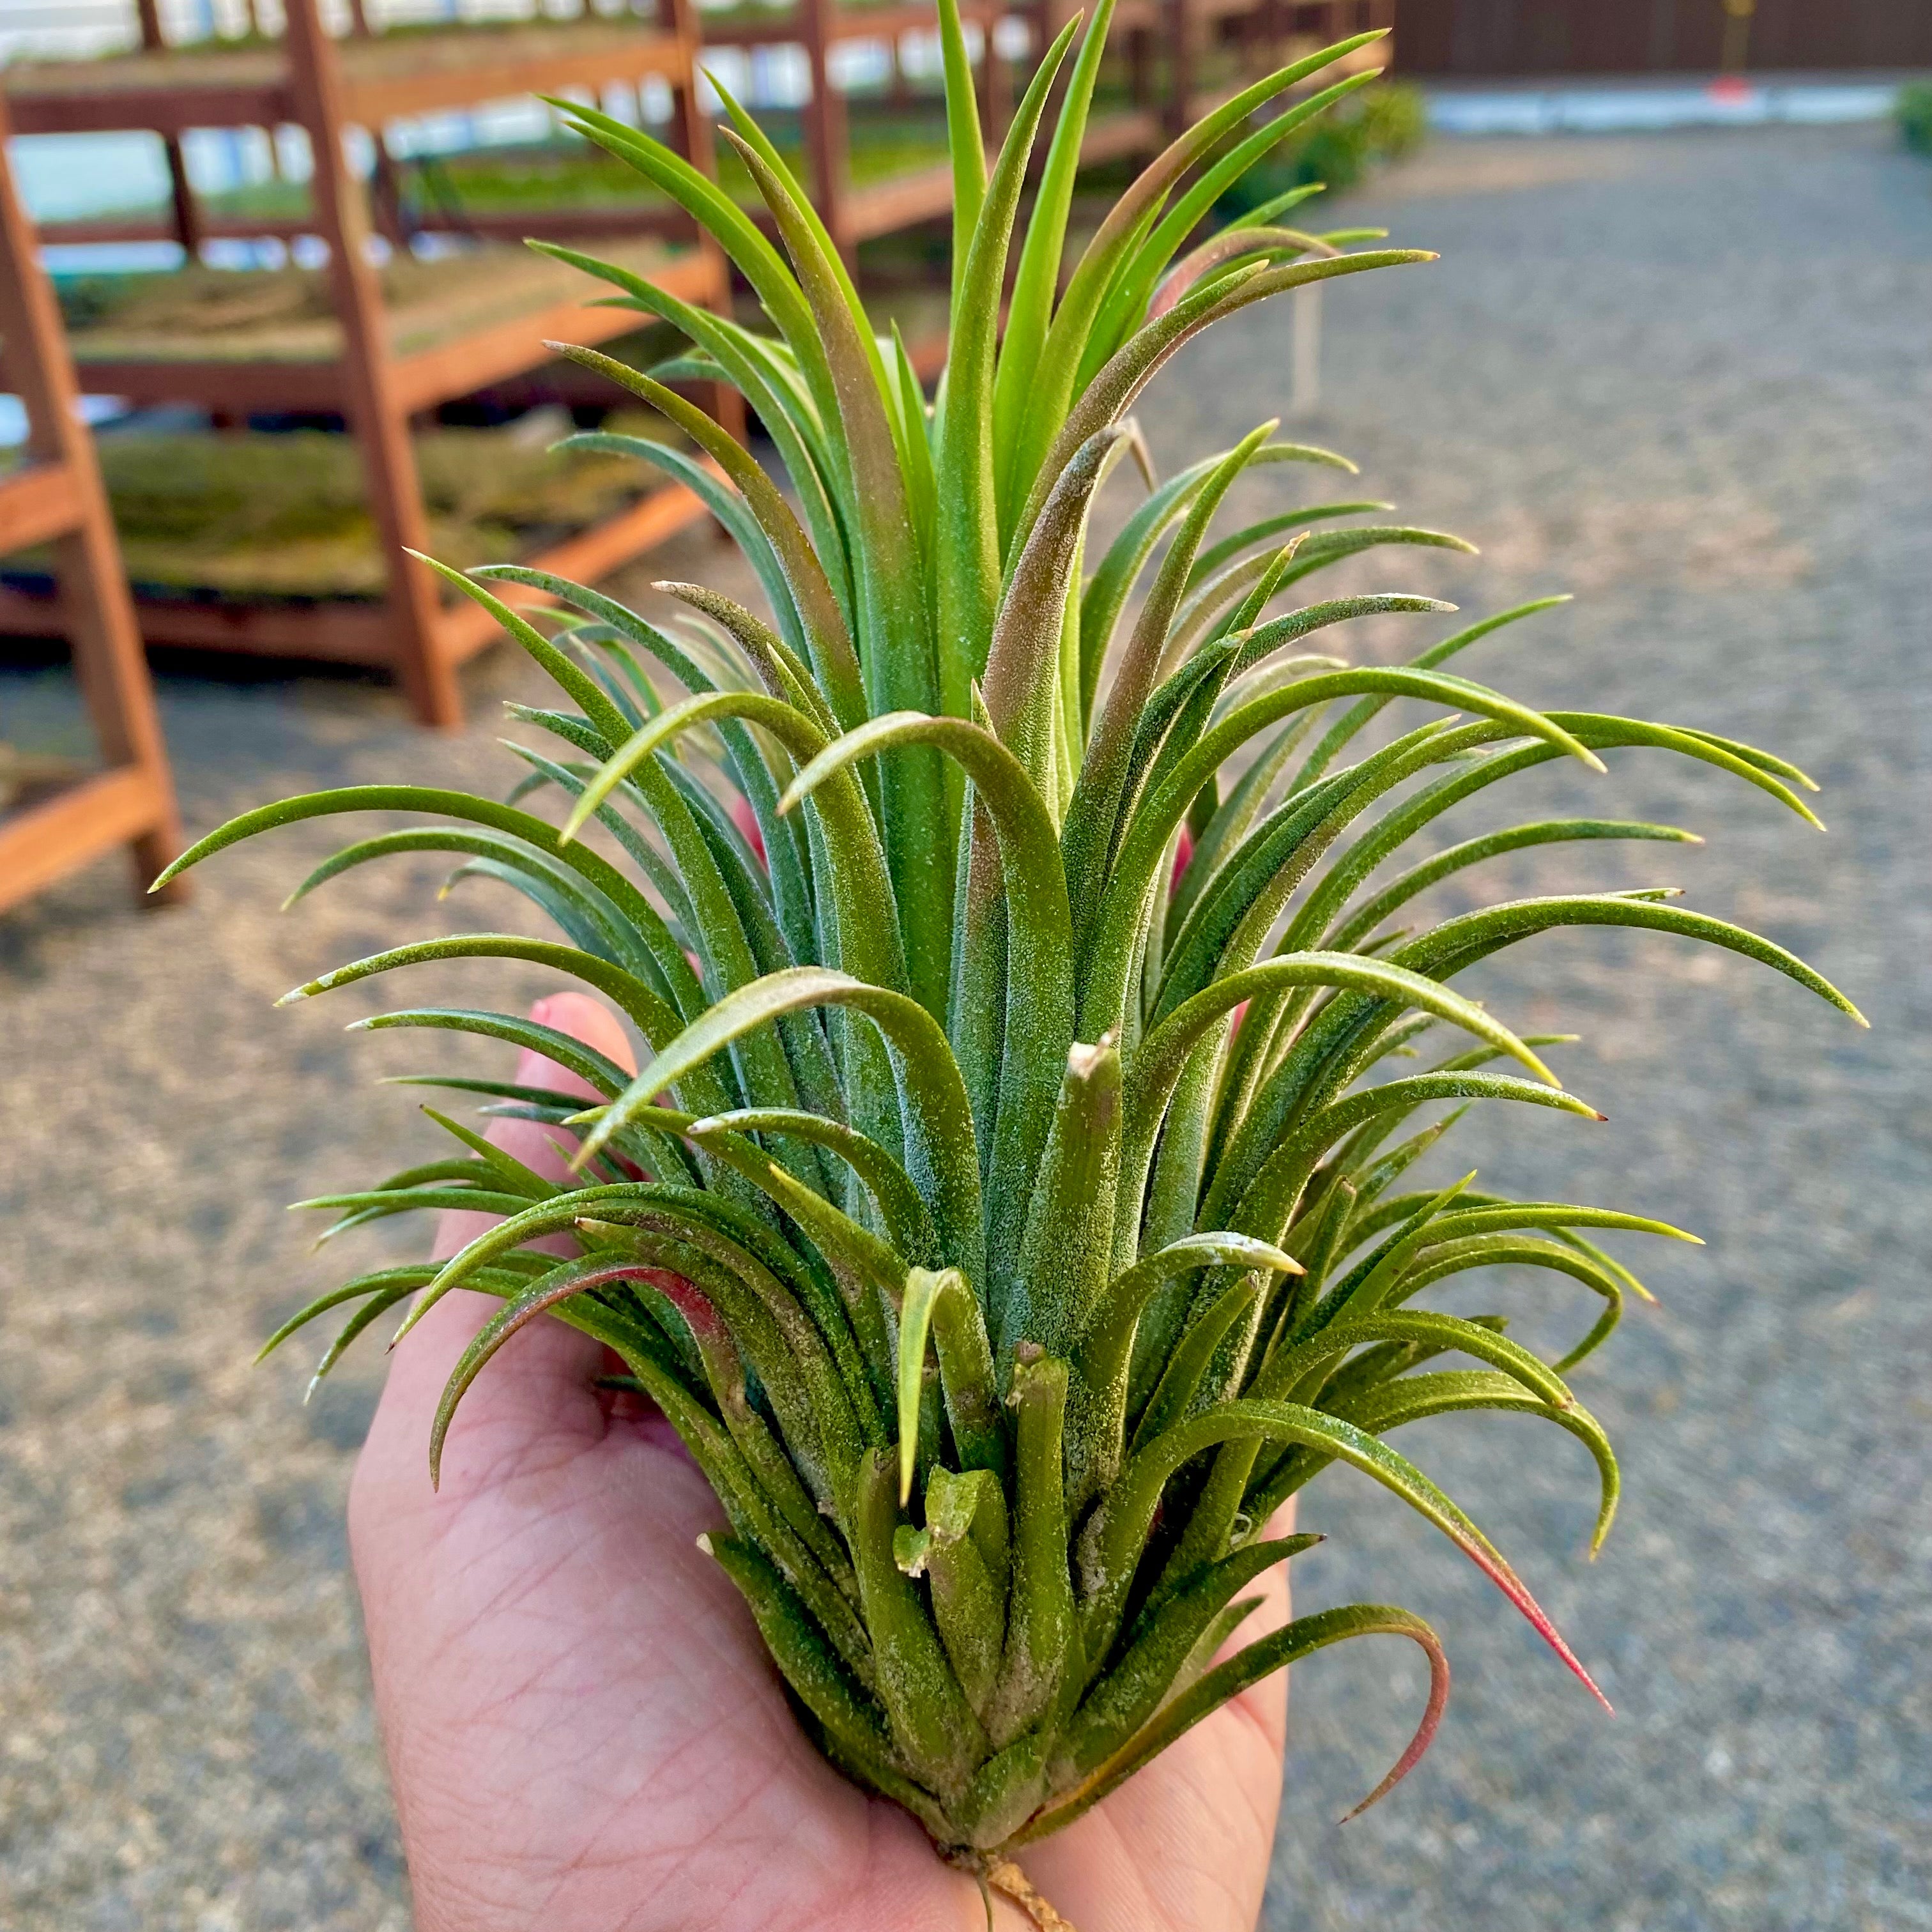 Ionantha Curly Giant XL Selections